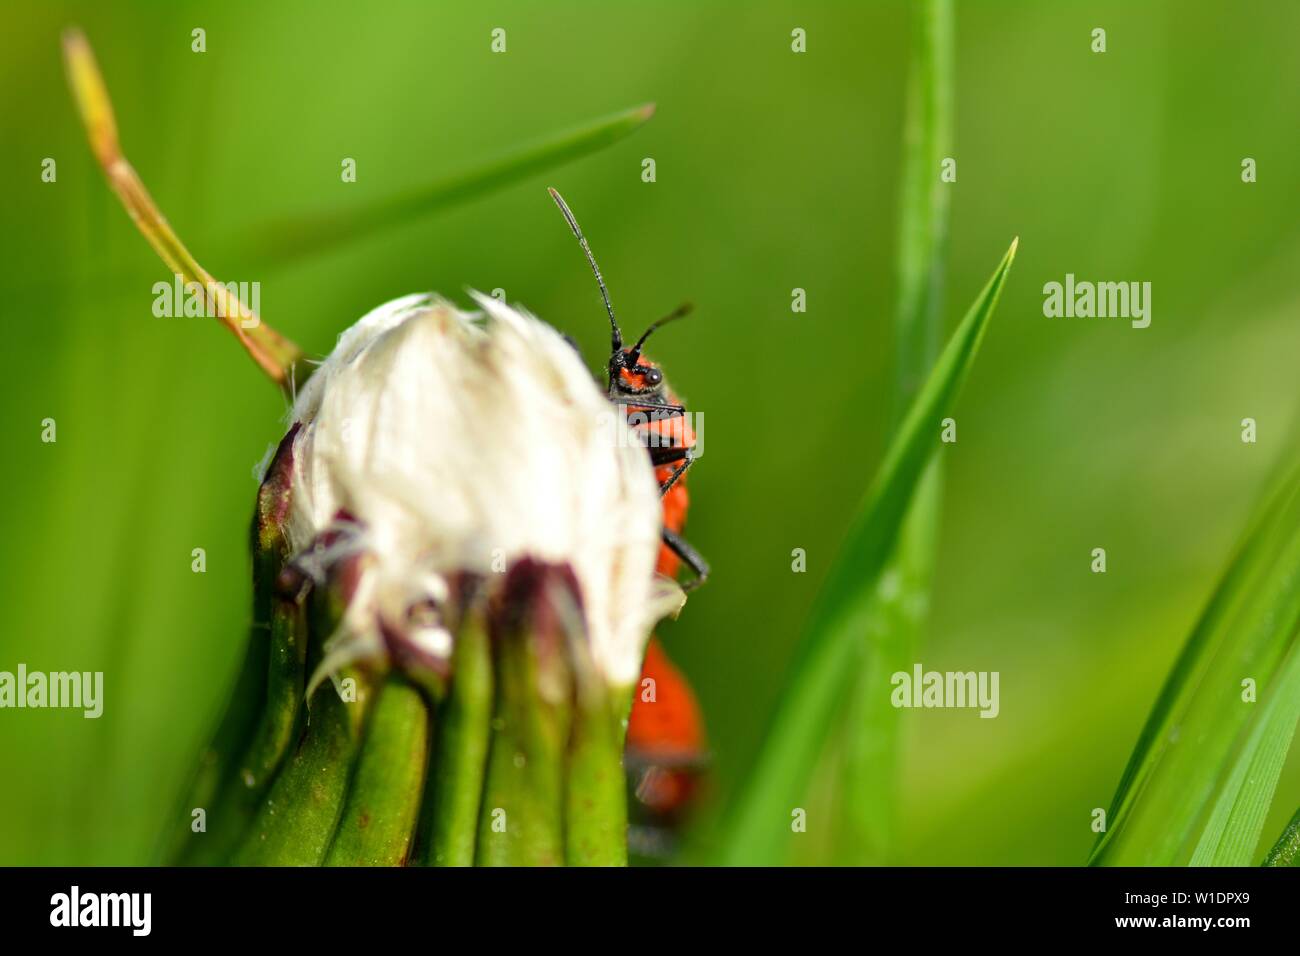 Cinnamon bug   (  Corizus hyoscyami  ), sitting on dandelion blossom and looking curiously forward, with a lot of green nature background Stock Photo